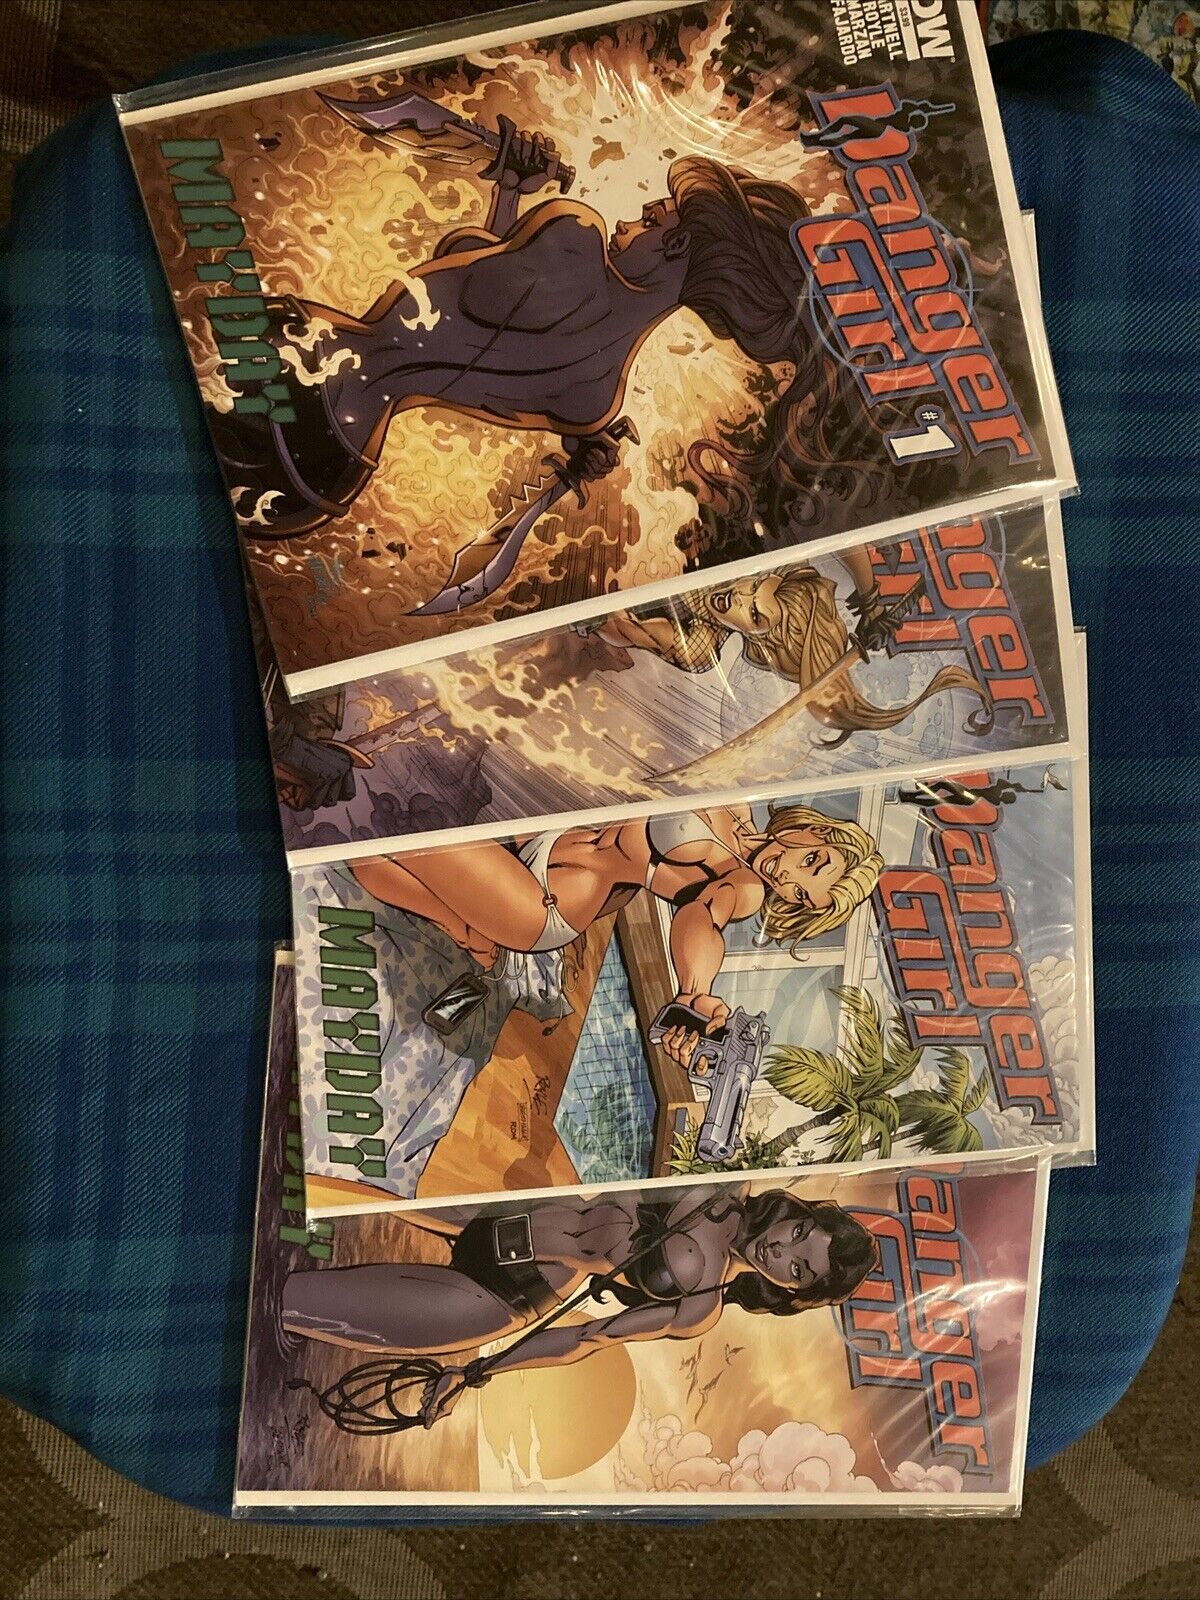 Danger Girl Mayday #1-4 Complete Run - Books 3 & 4 both Sub Cover Variant